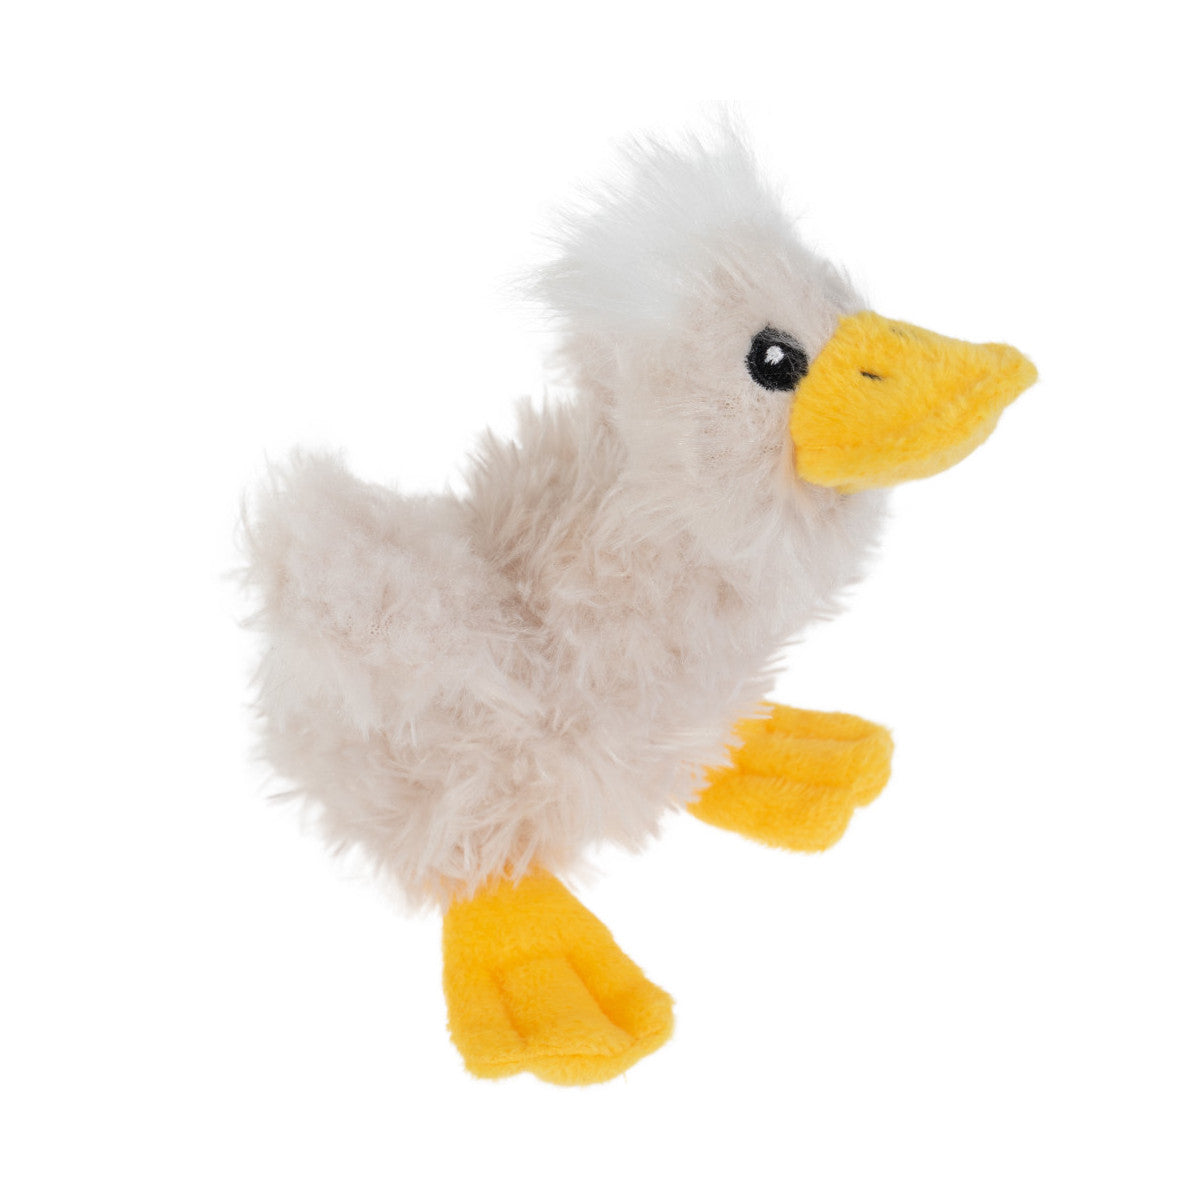 Yours Droolly Cuddly Duck Plush Dog Toy